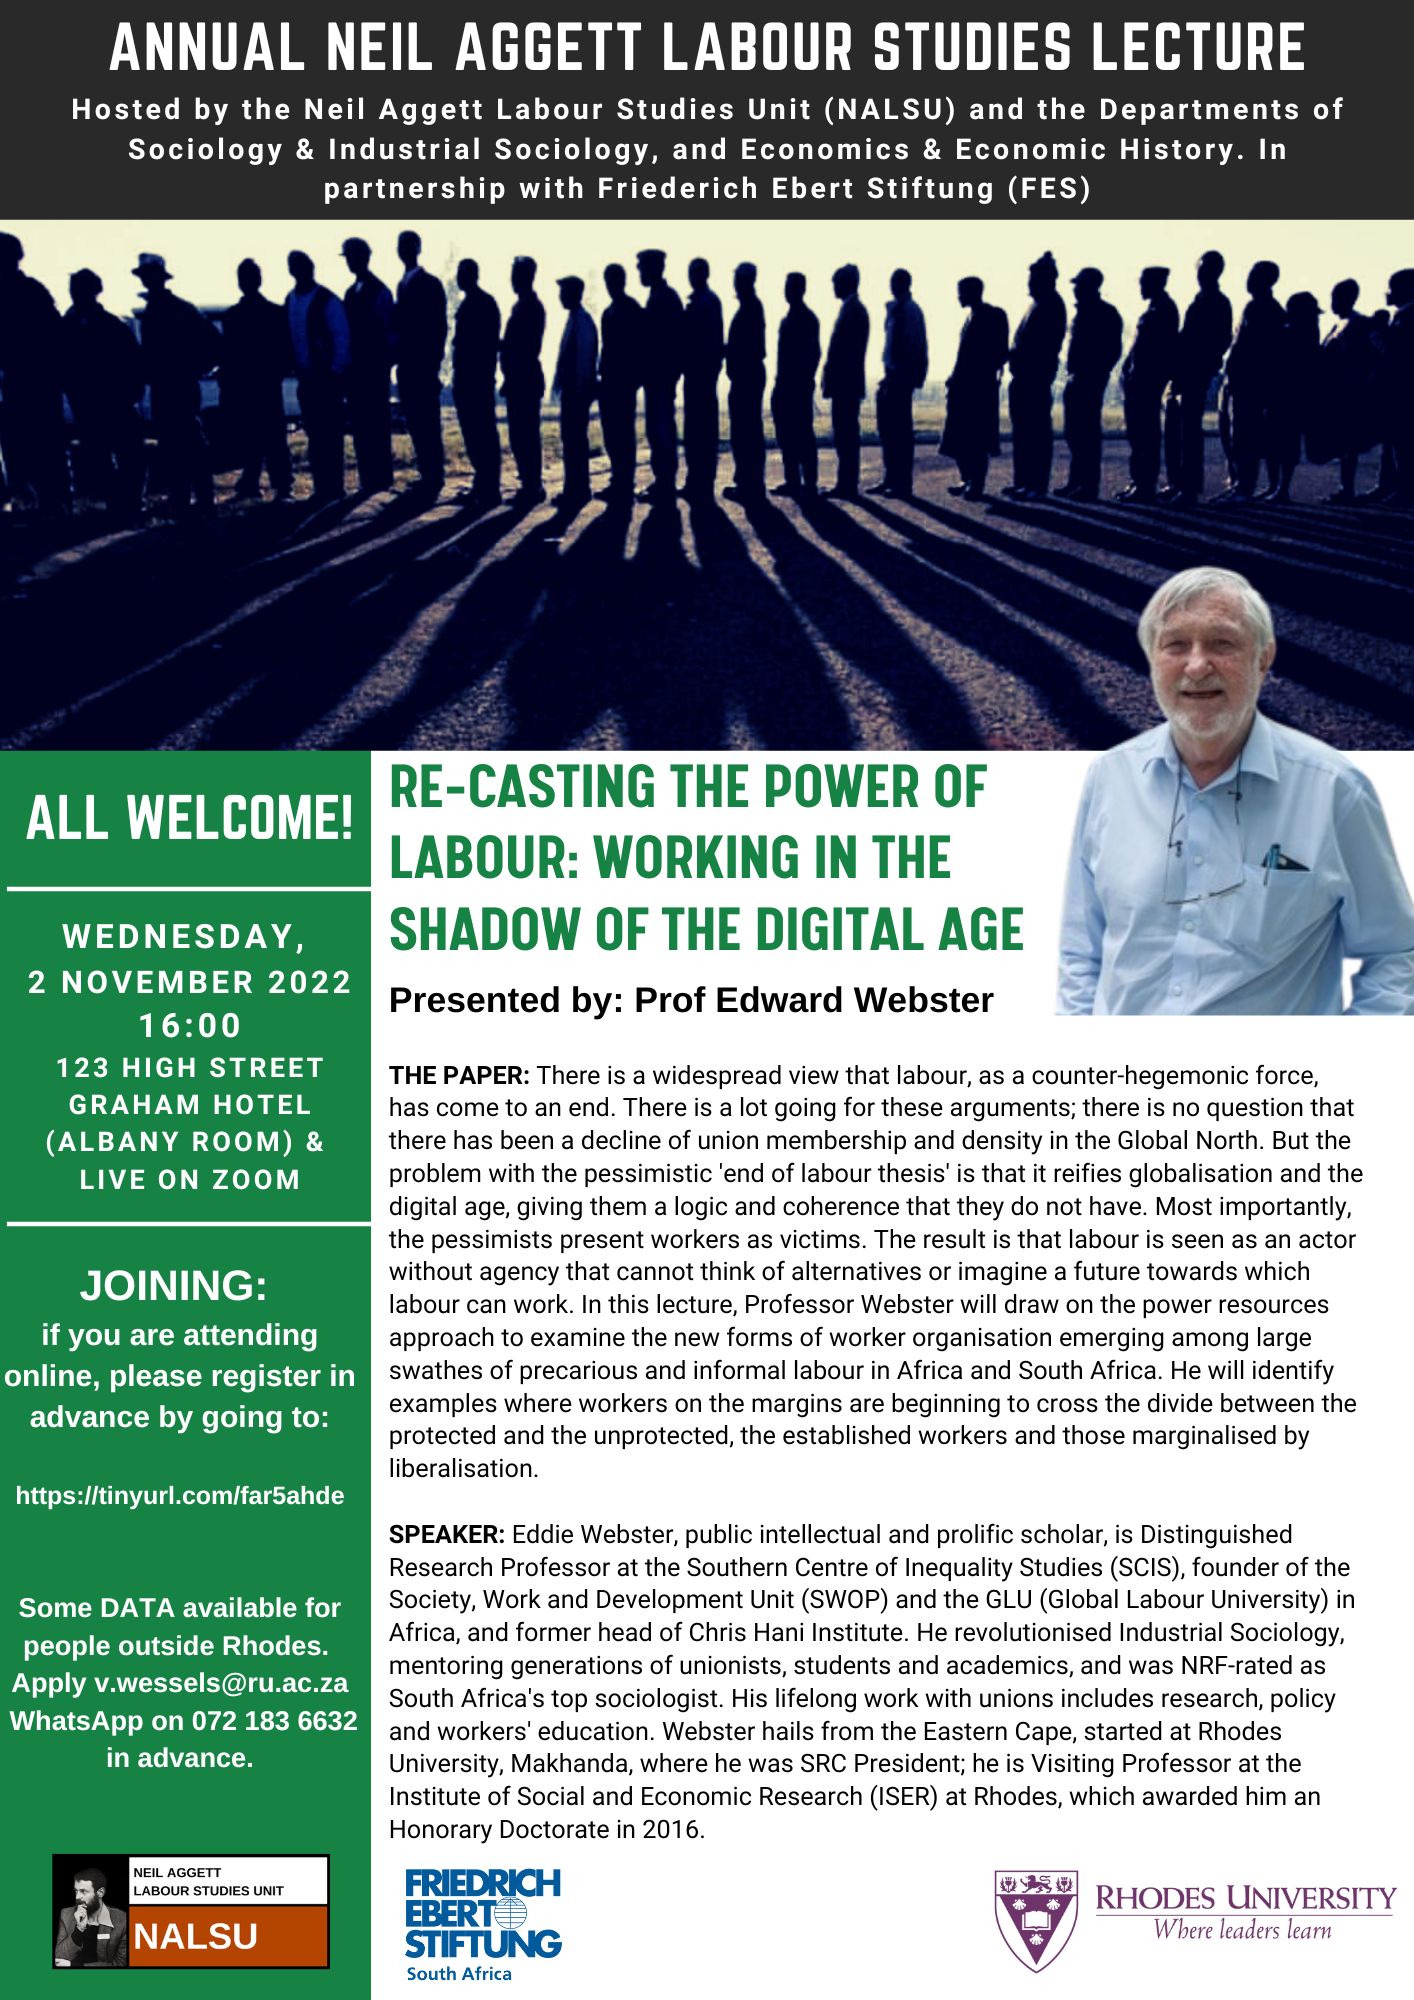 Eddie Webster: "Re-Casting the Power of Labour: Working in the Shadow of the Digital Age"